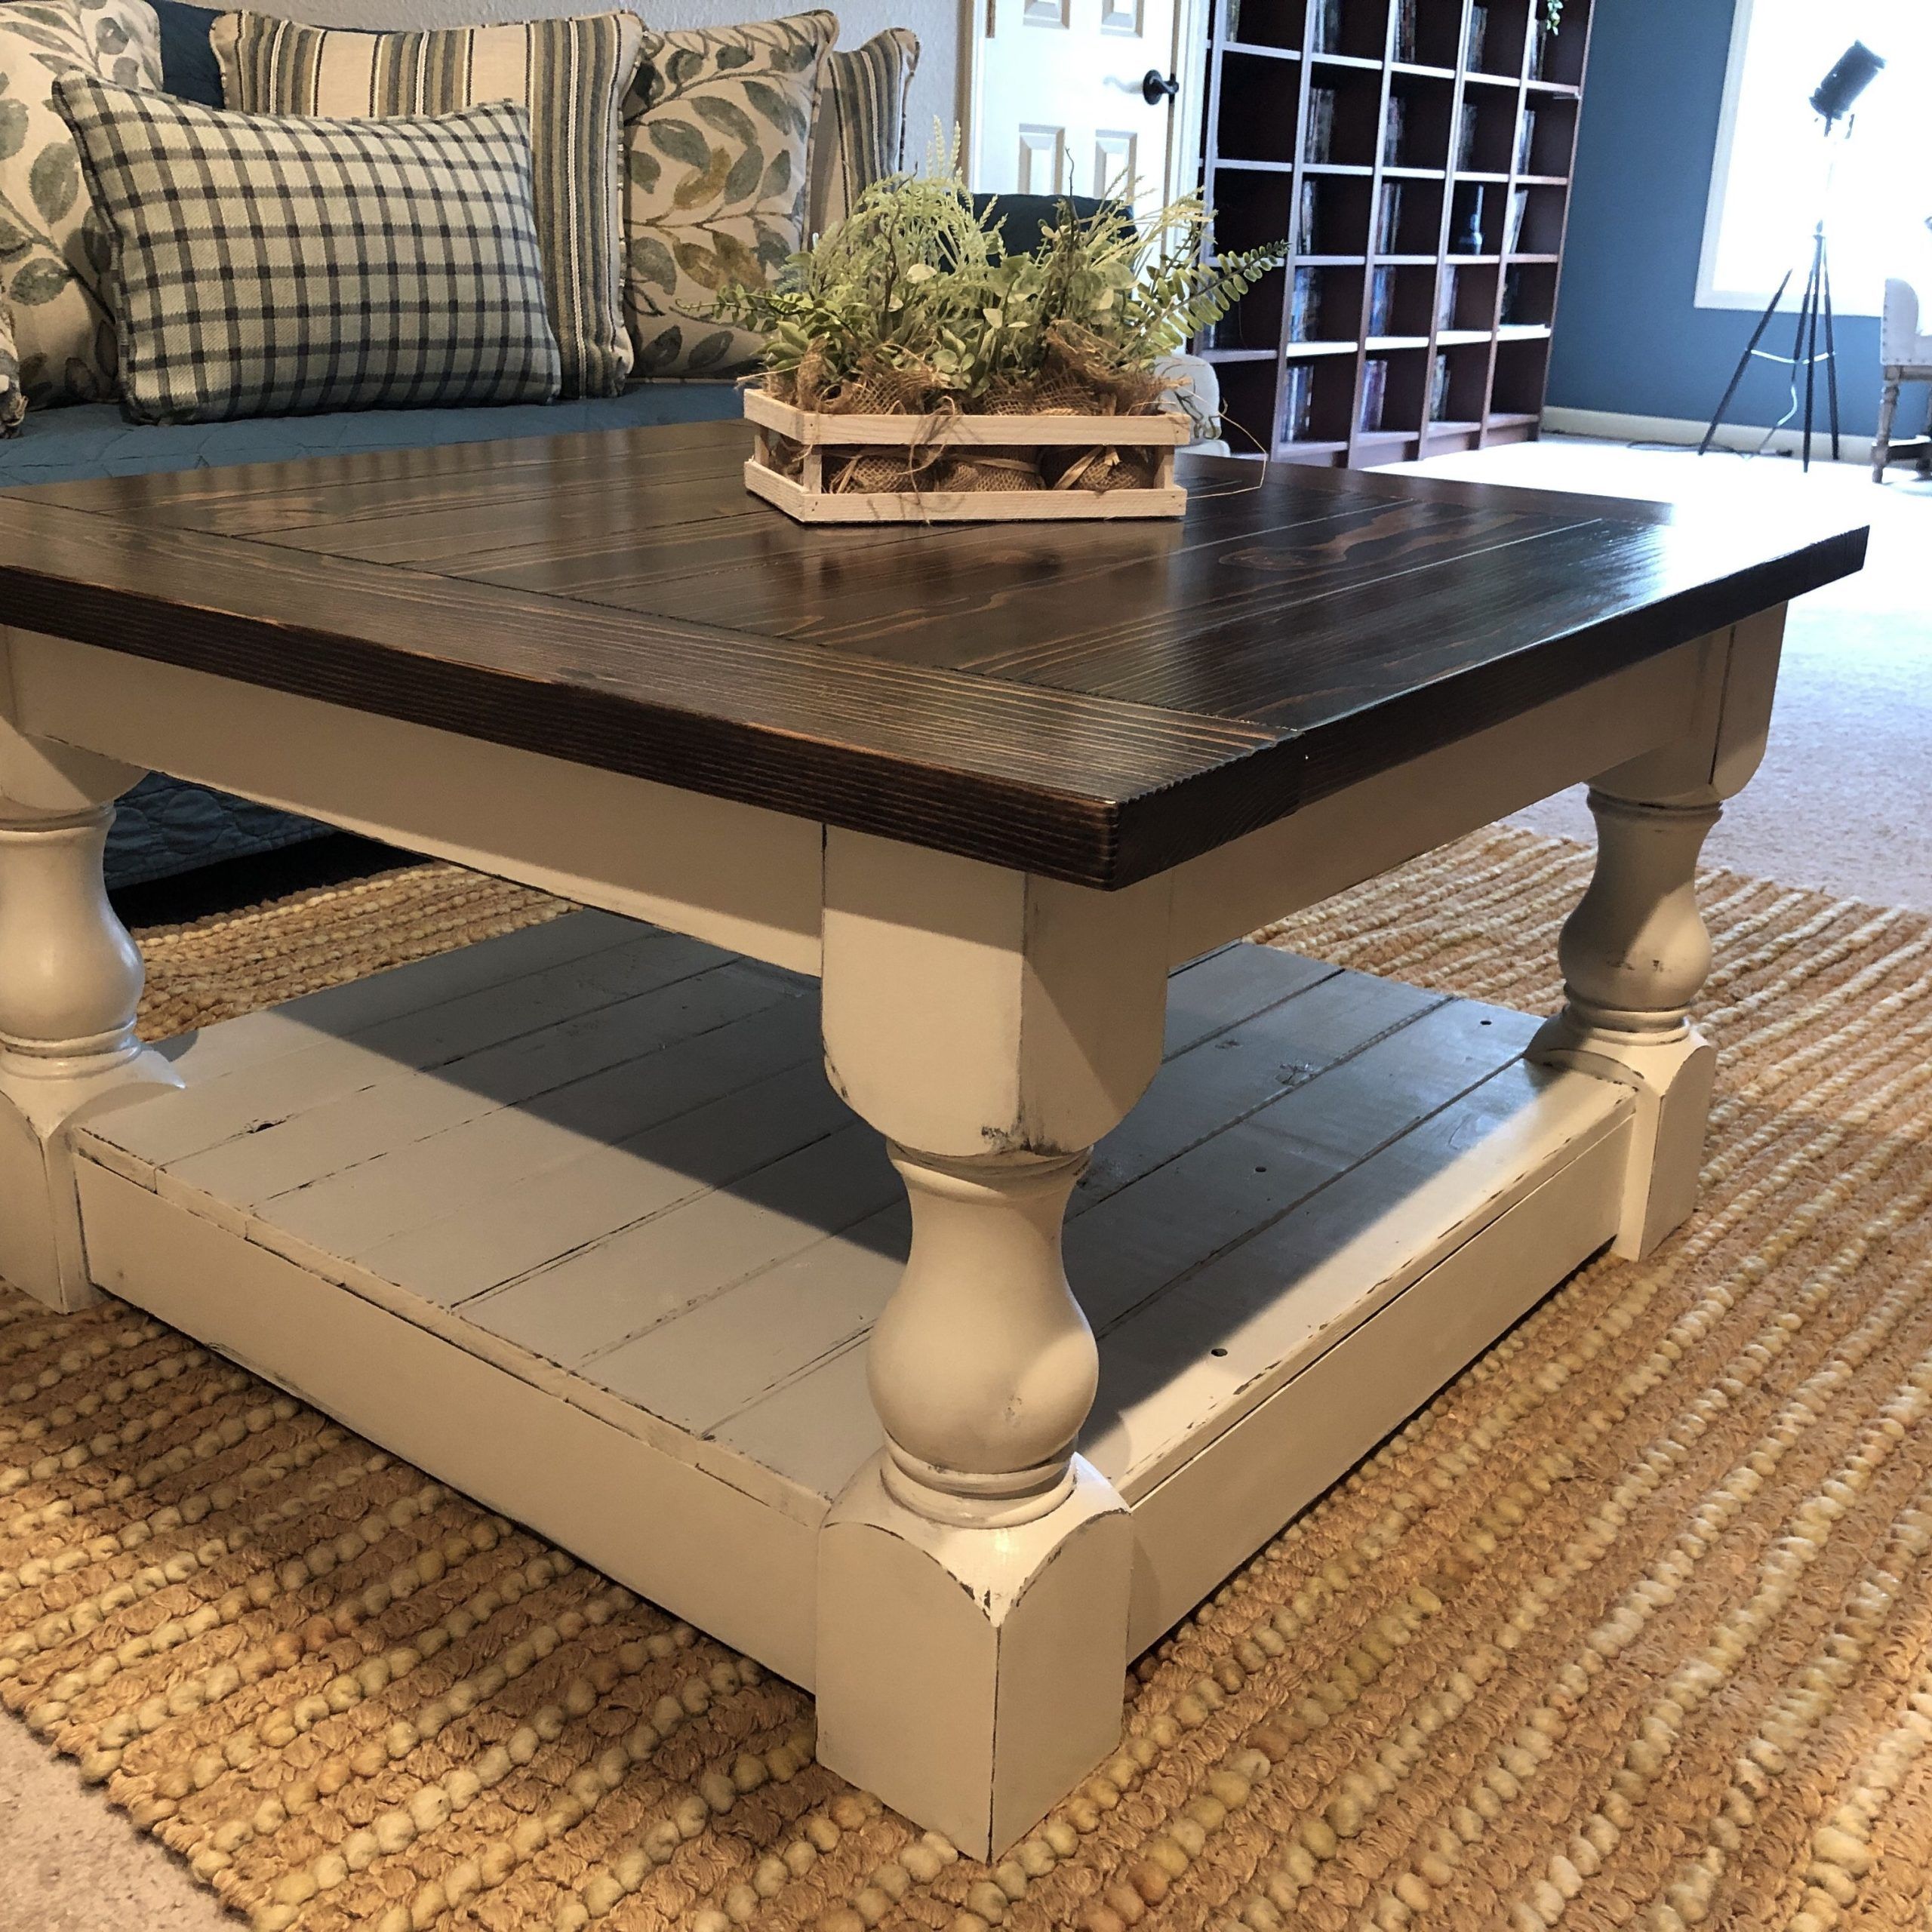 Rustic Square Coffee Tables: An Ideal Choice For Any Room – Coffee Throughout Transitional Square Coffee Tables (View 14 of 20)